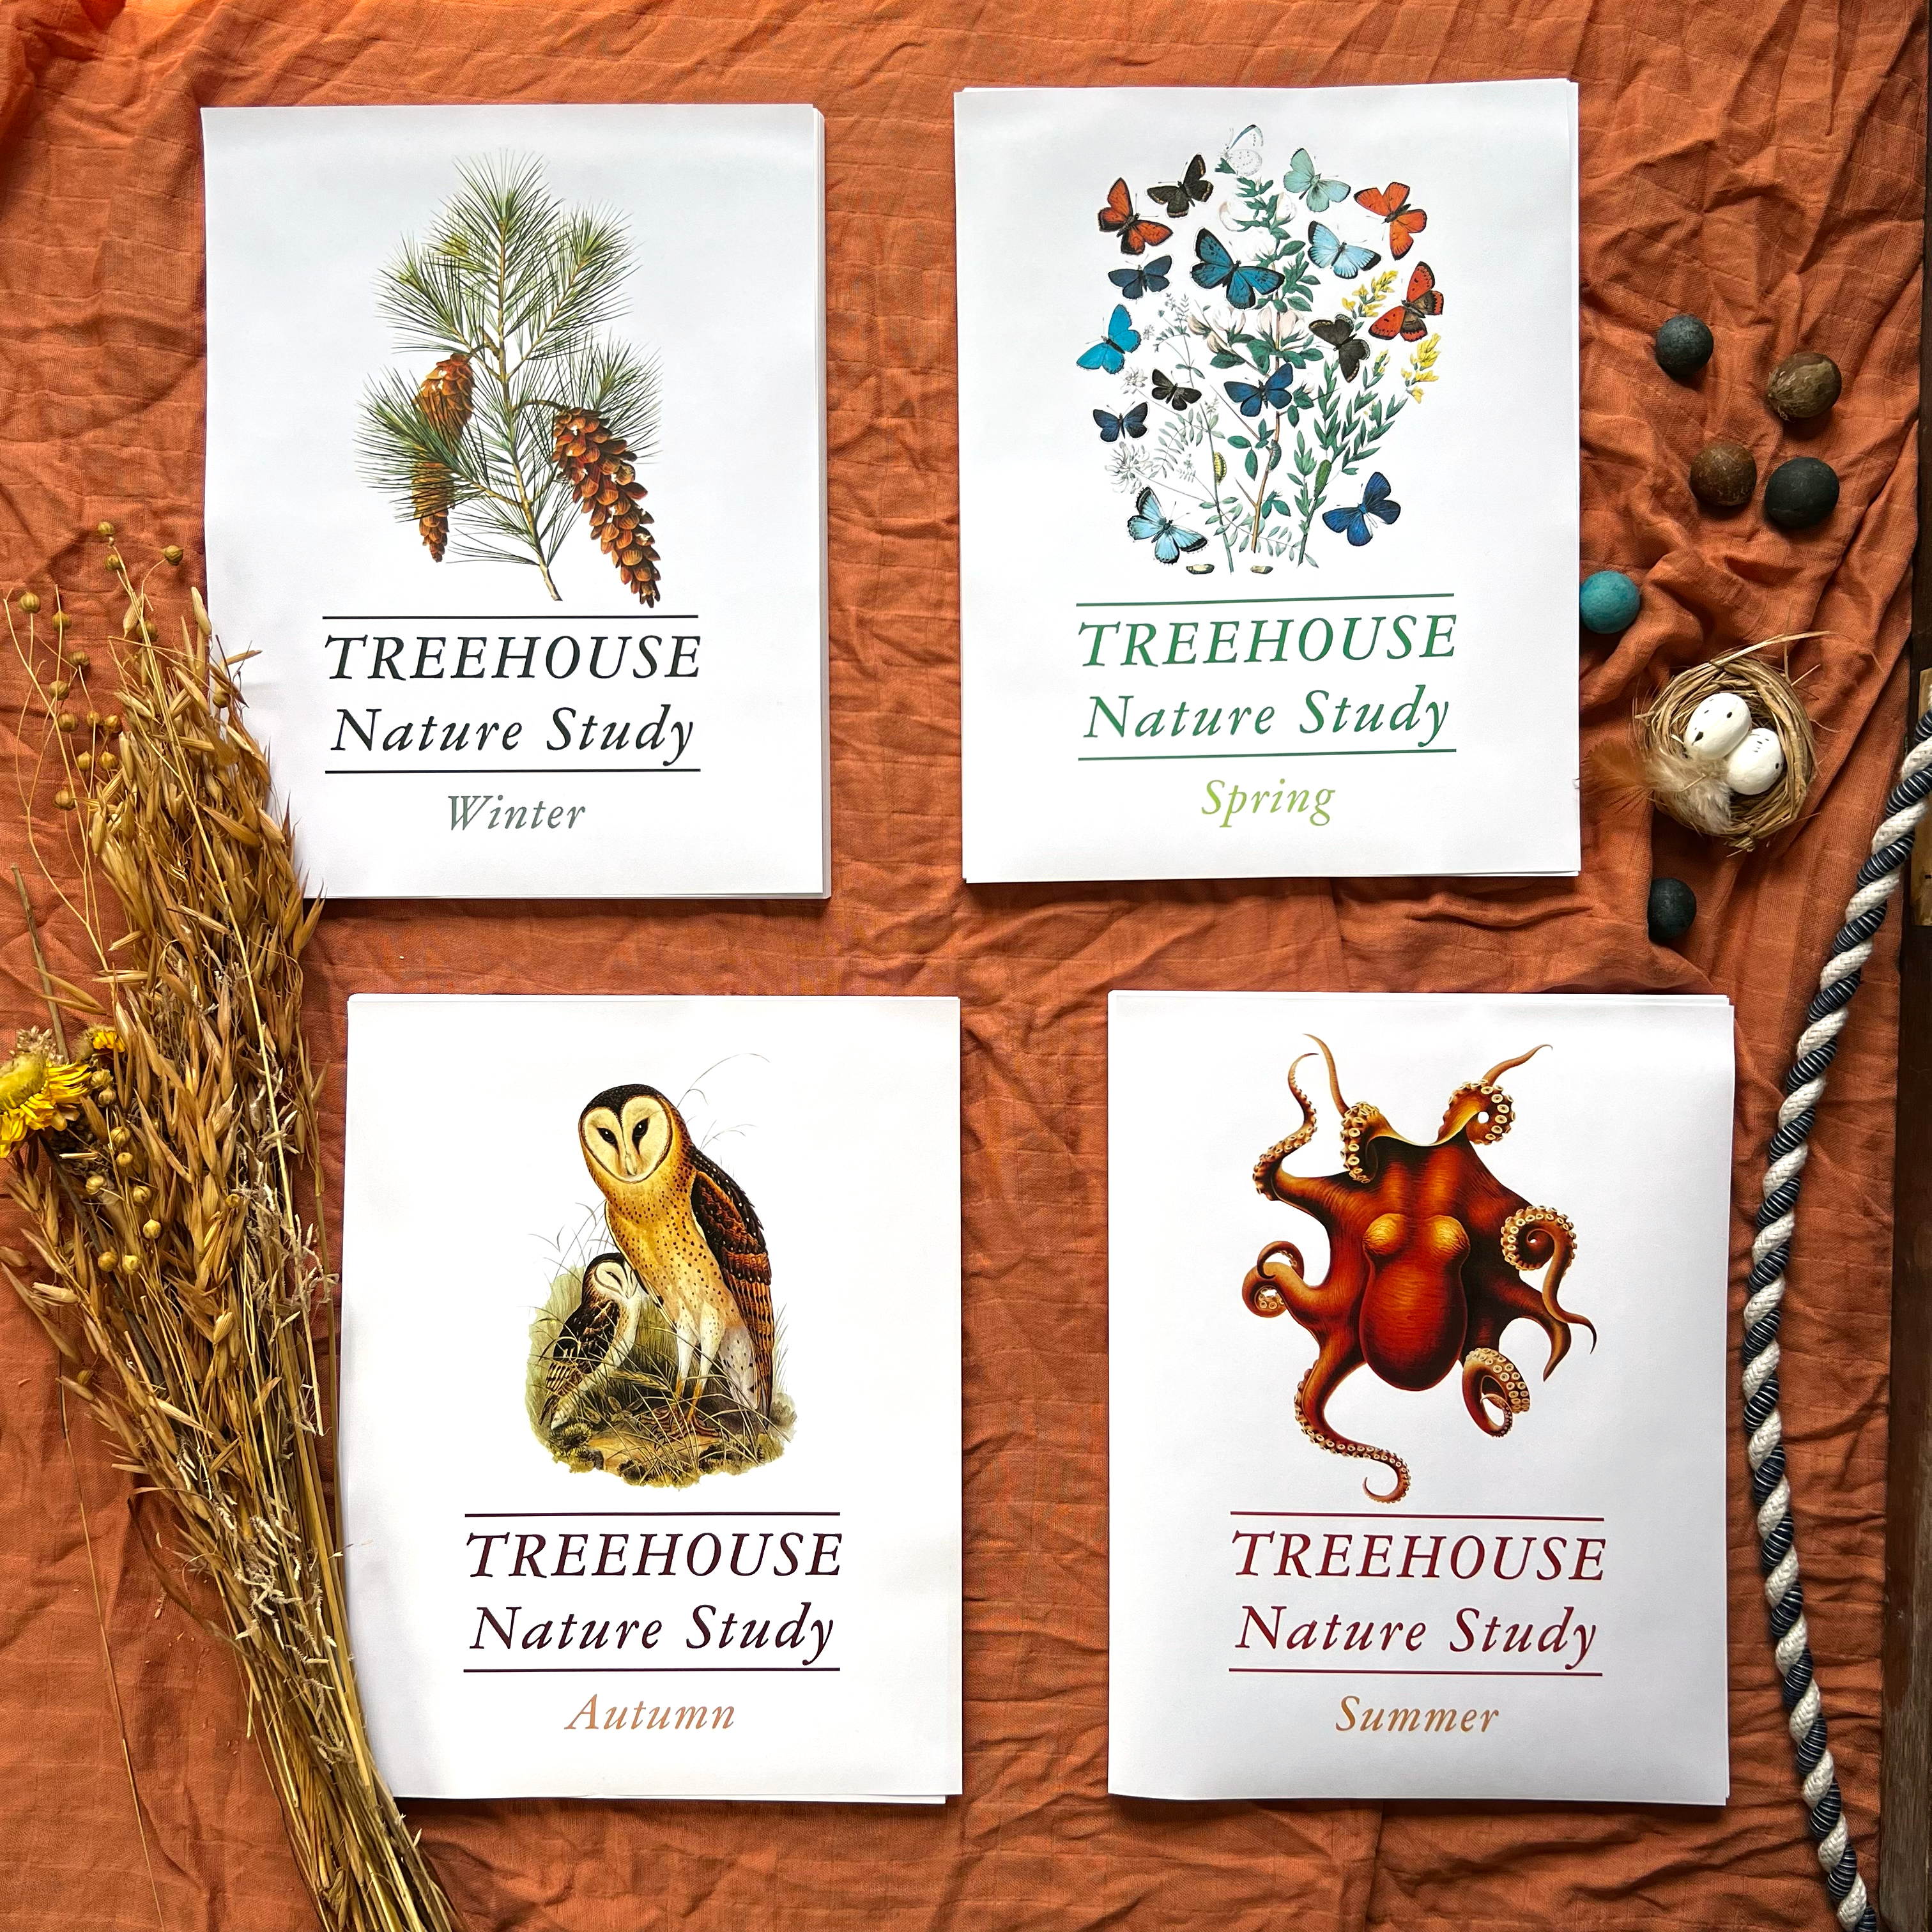 Treehouse Nature Study: Four Seasons Collection (Small Group License)